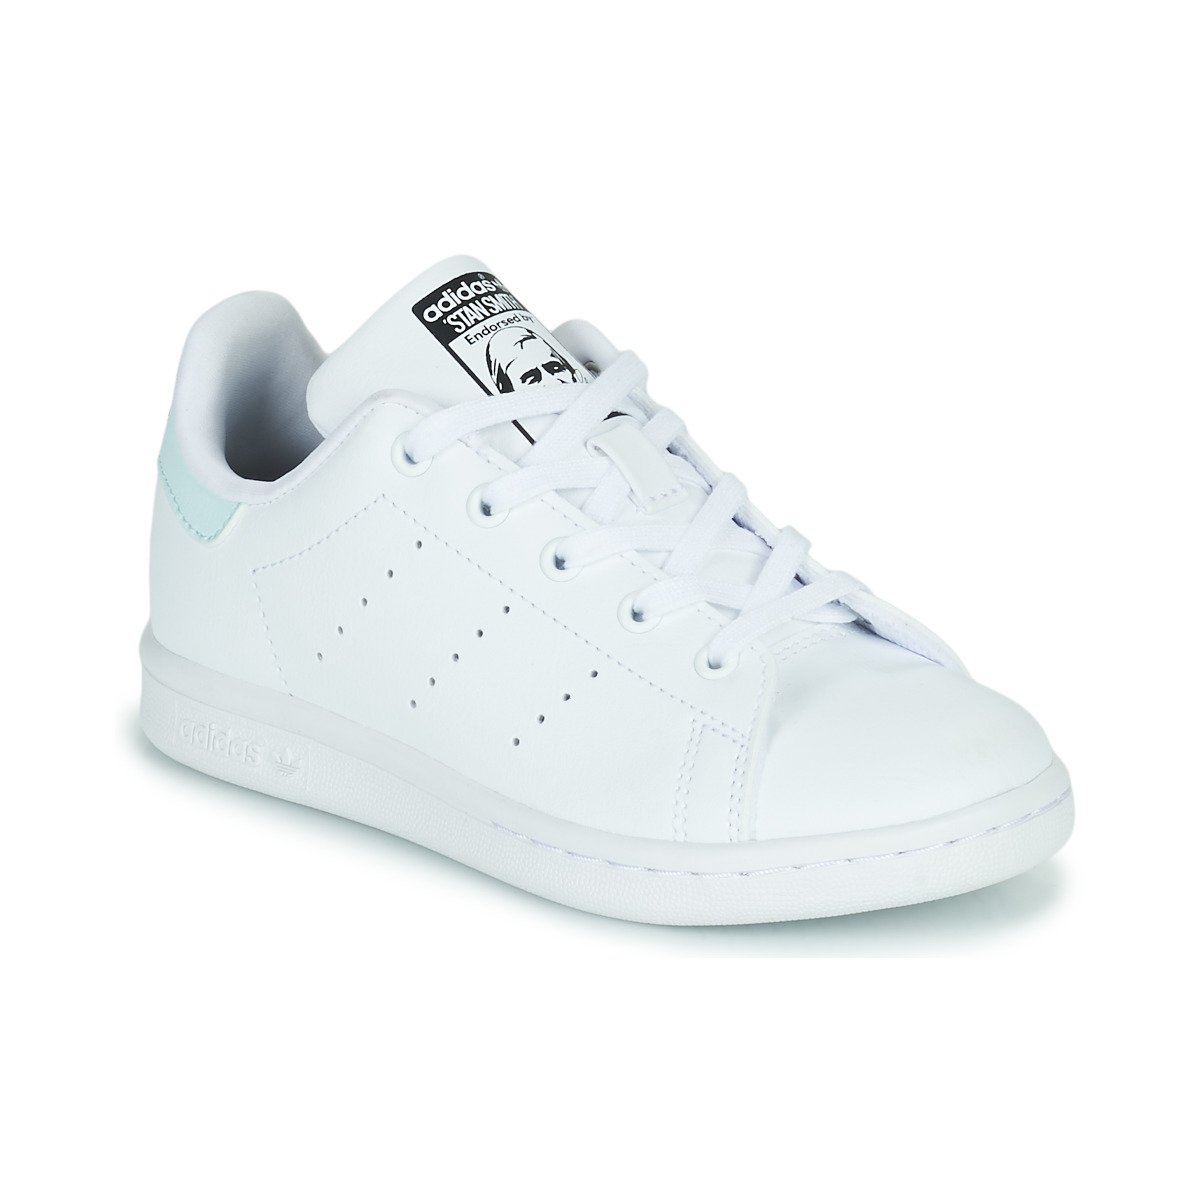 Andrew Halliday Perfect minstens adidas Originals STAN SMITH C White / Blue - Free delivery | Spartoo NET !  - Shoes Low top trainers Child USD/$57.60